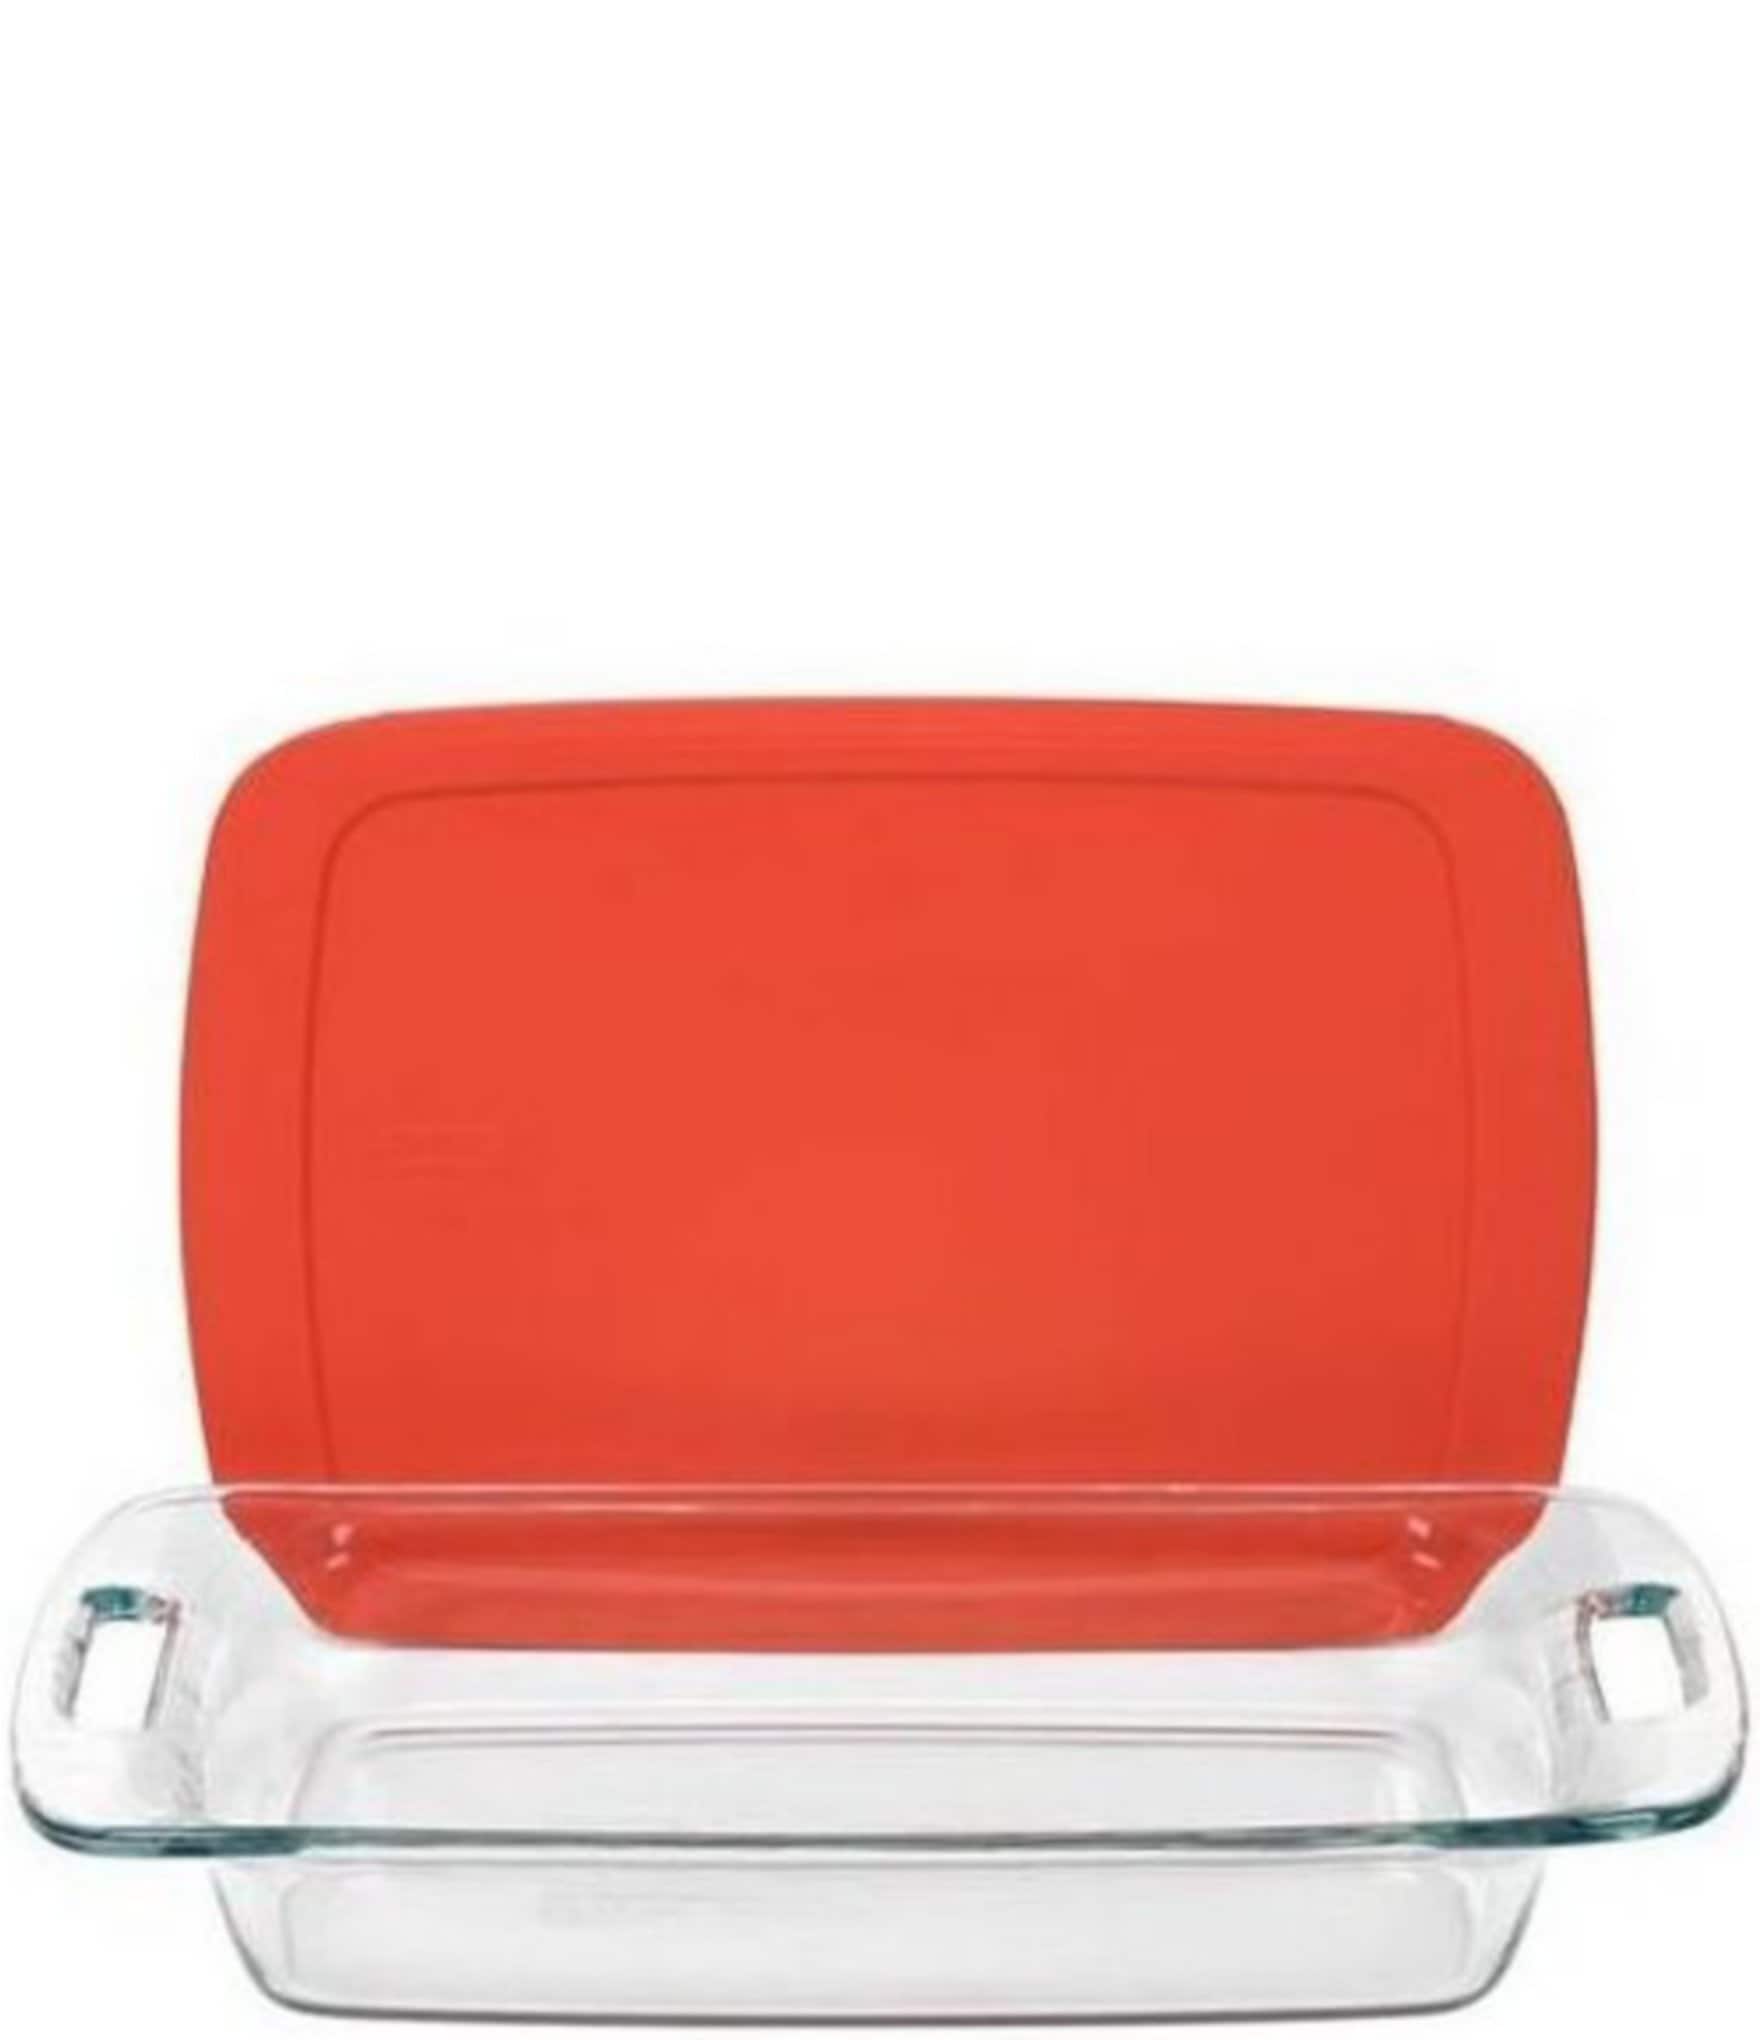 https://dimg.dillards.com/is/image/DillardsZoom/zoom/pyrex-easy-grab-3-quart-oblong-baking-dish-with-red-plastic-cover/03659663_zi.jpg